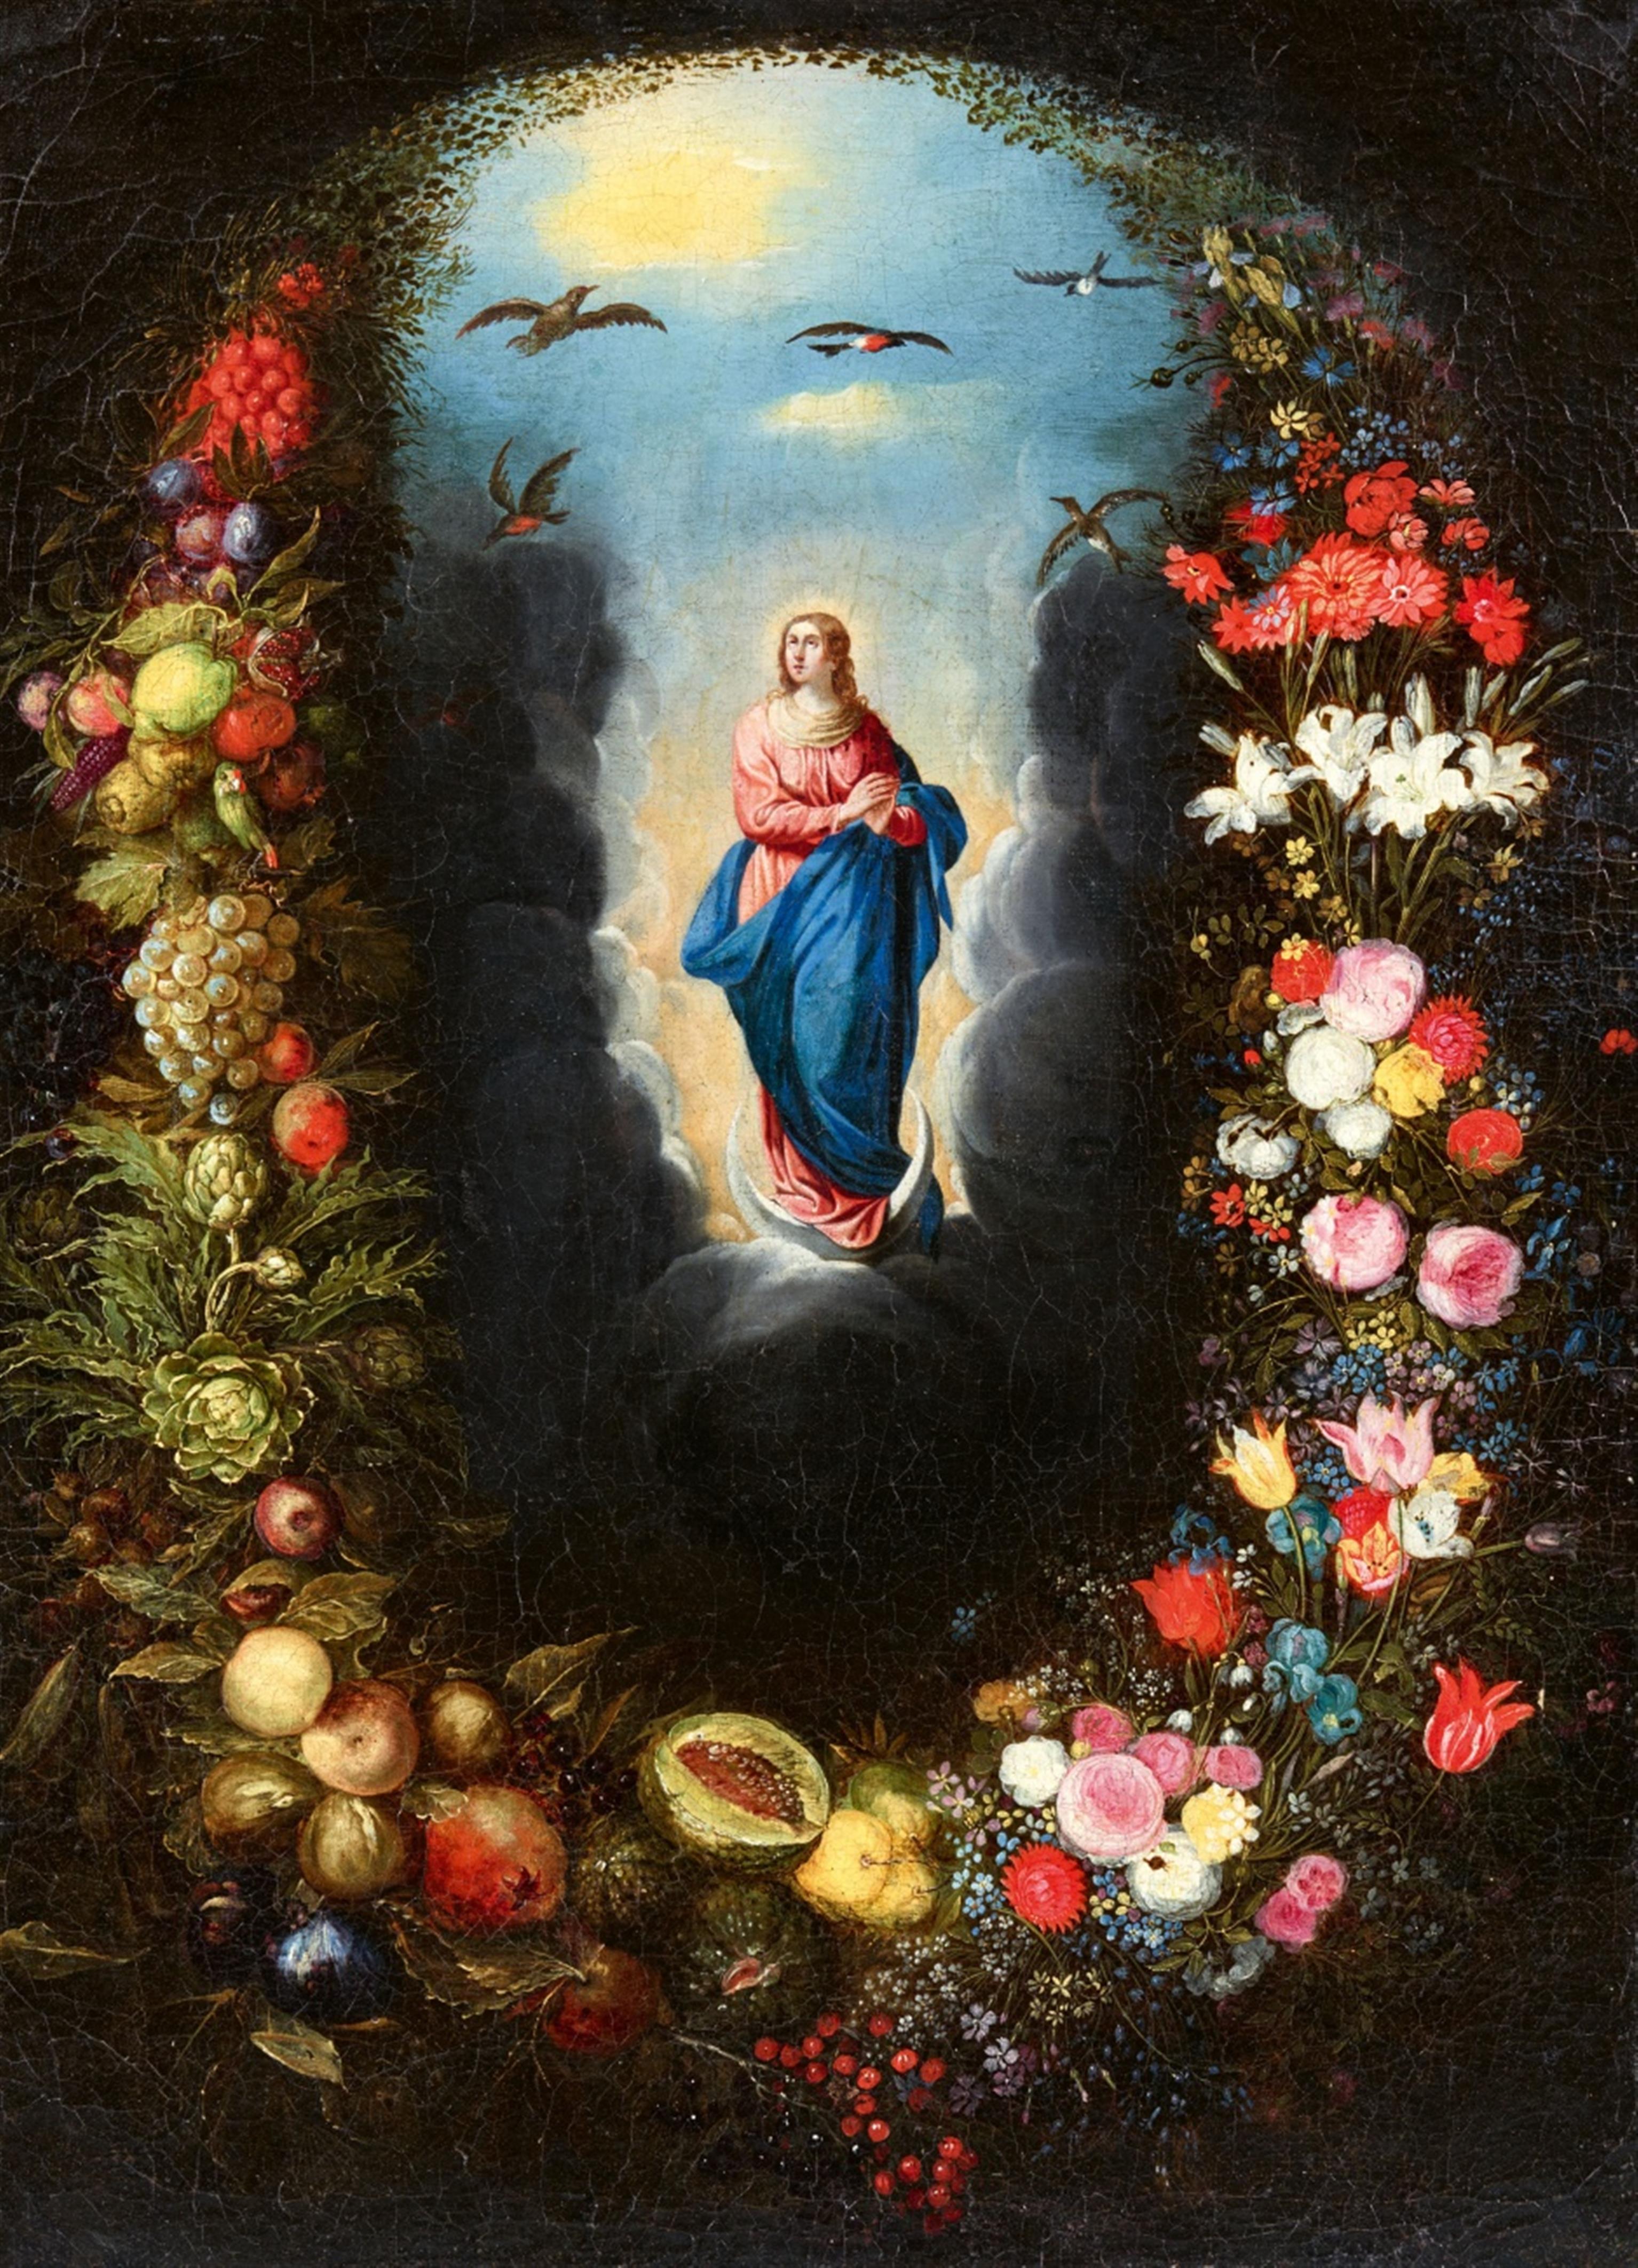 Jan Brueghel the Younger - The Virgin on the Crescent in a Garland of Flowers and Fruit - image-1